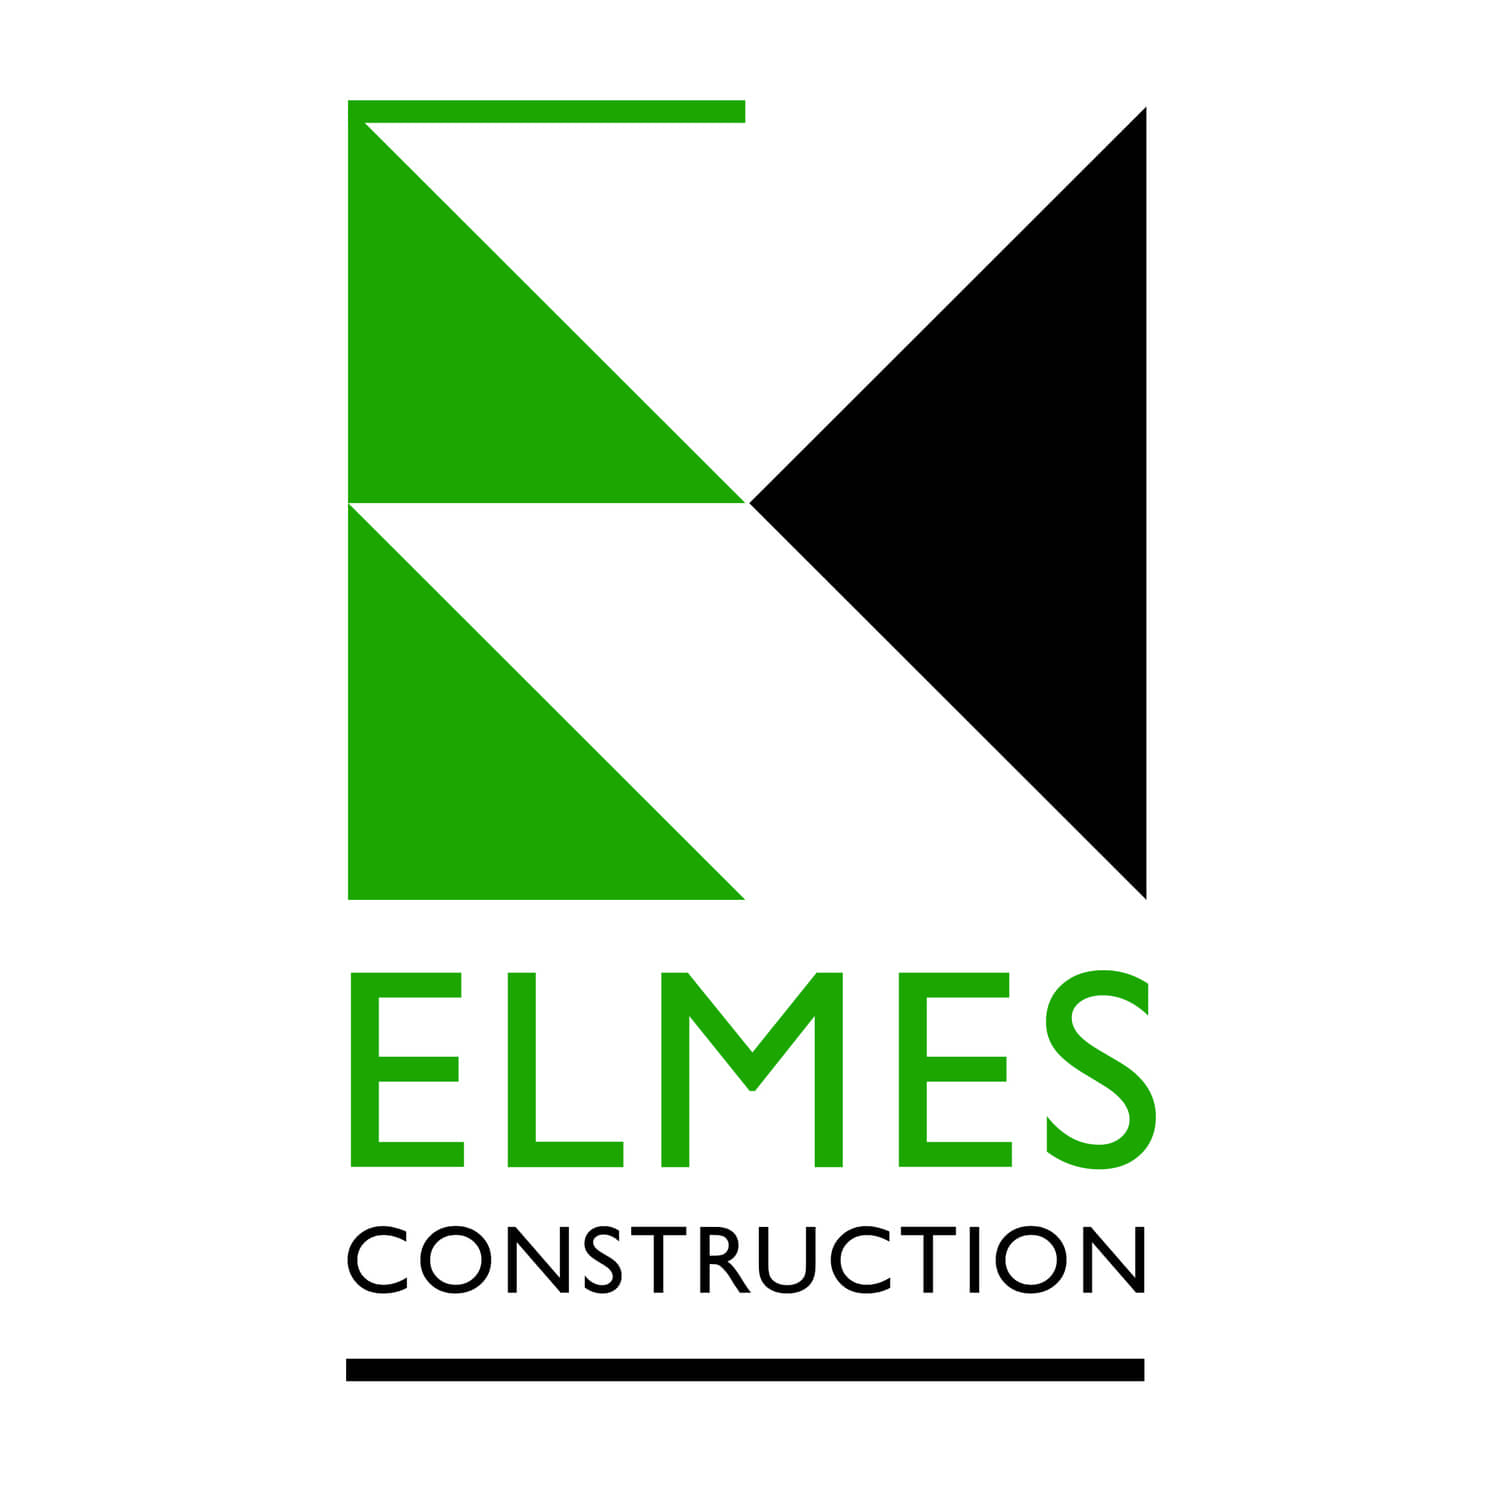 Builders Plymouth | Building Contractor Plymouth | Bricklayers Plymouth | General Builders Plymouth